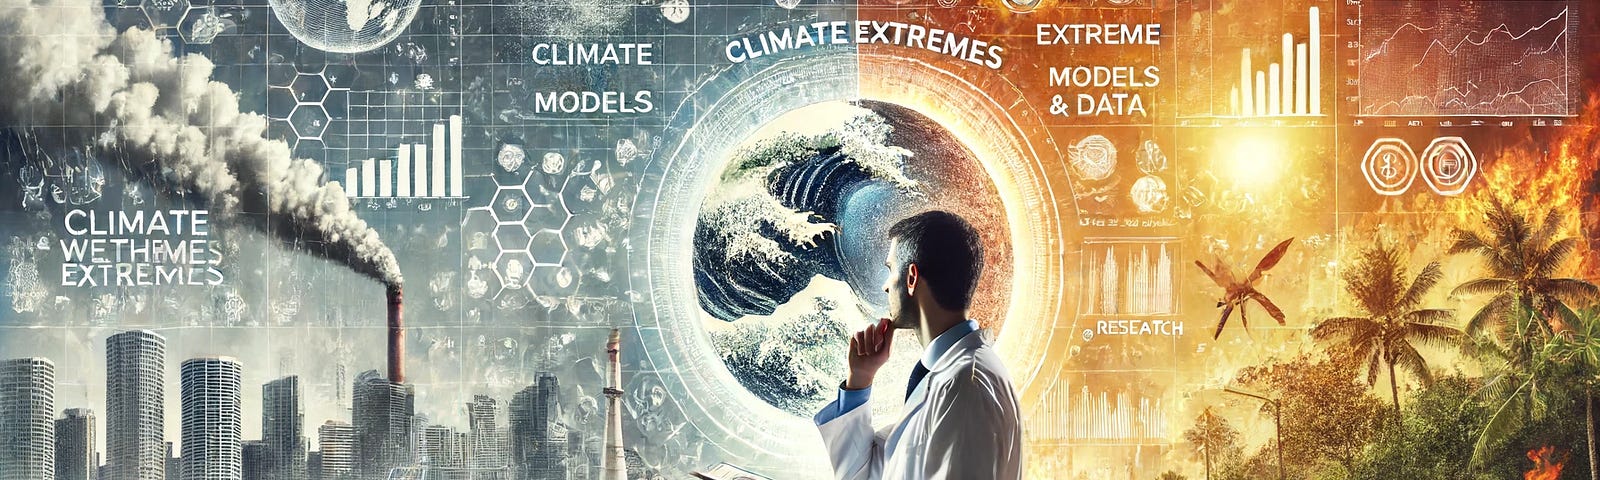 It illustrates the split-screen effect showing a scientist analyzing climate data on one side and various extreme weather events on the other side, emphasizing the unpredictable nature of climate change